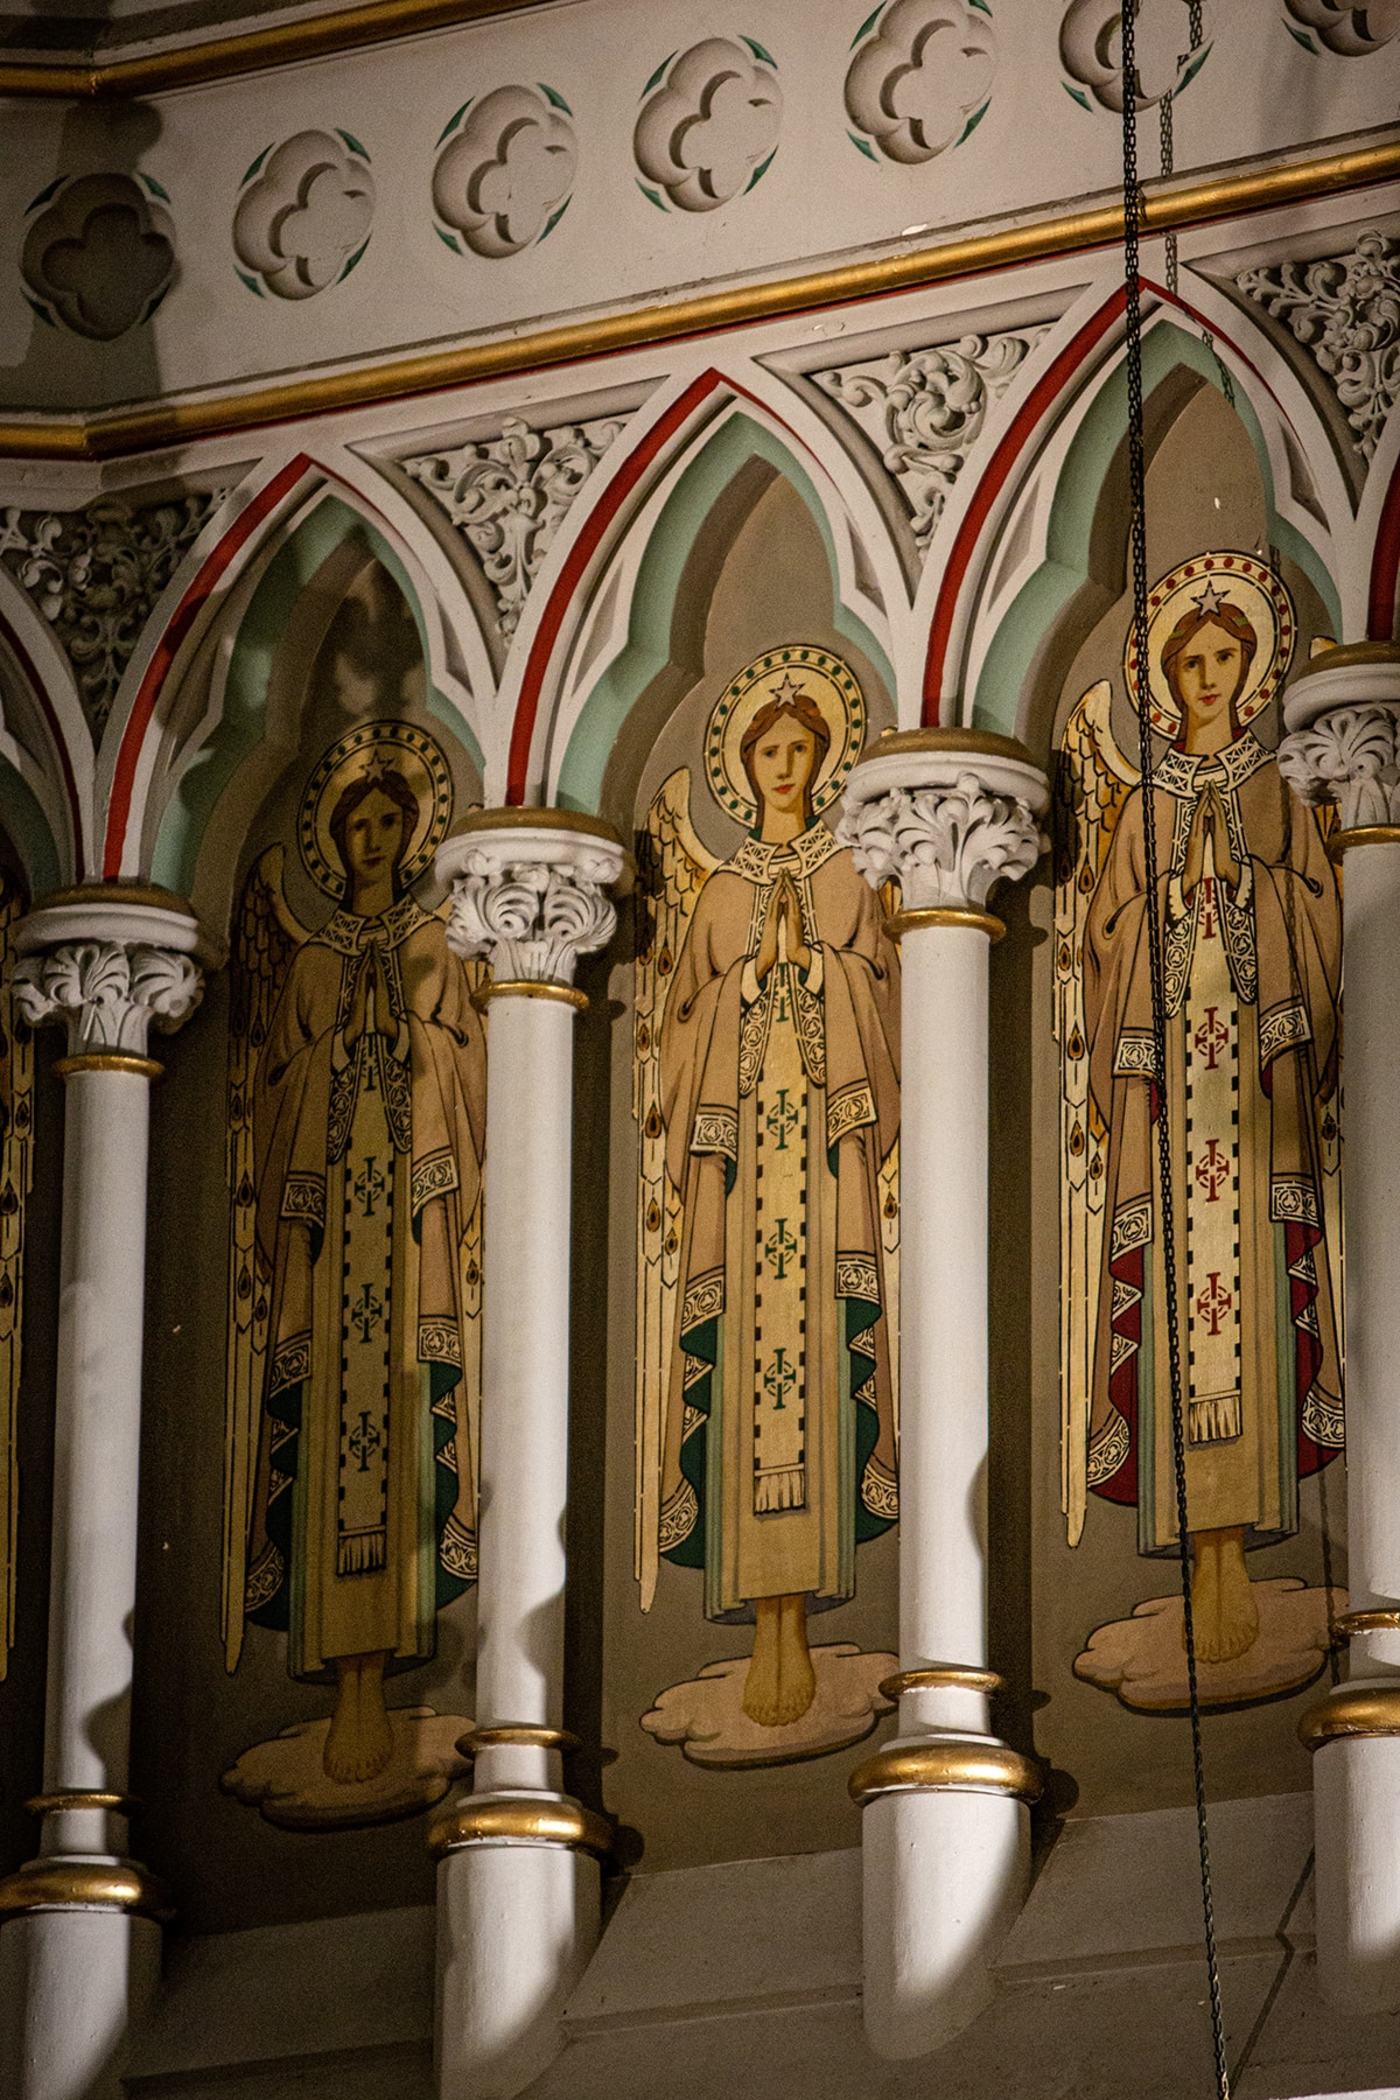 angels depicted in reredos in St. Francis Xavier church in Park Slope, Brooklyn